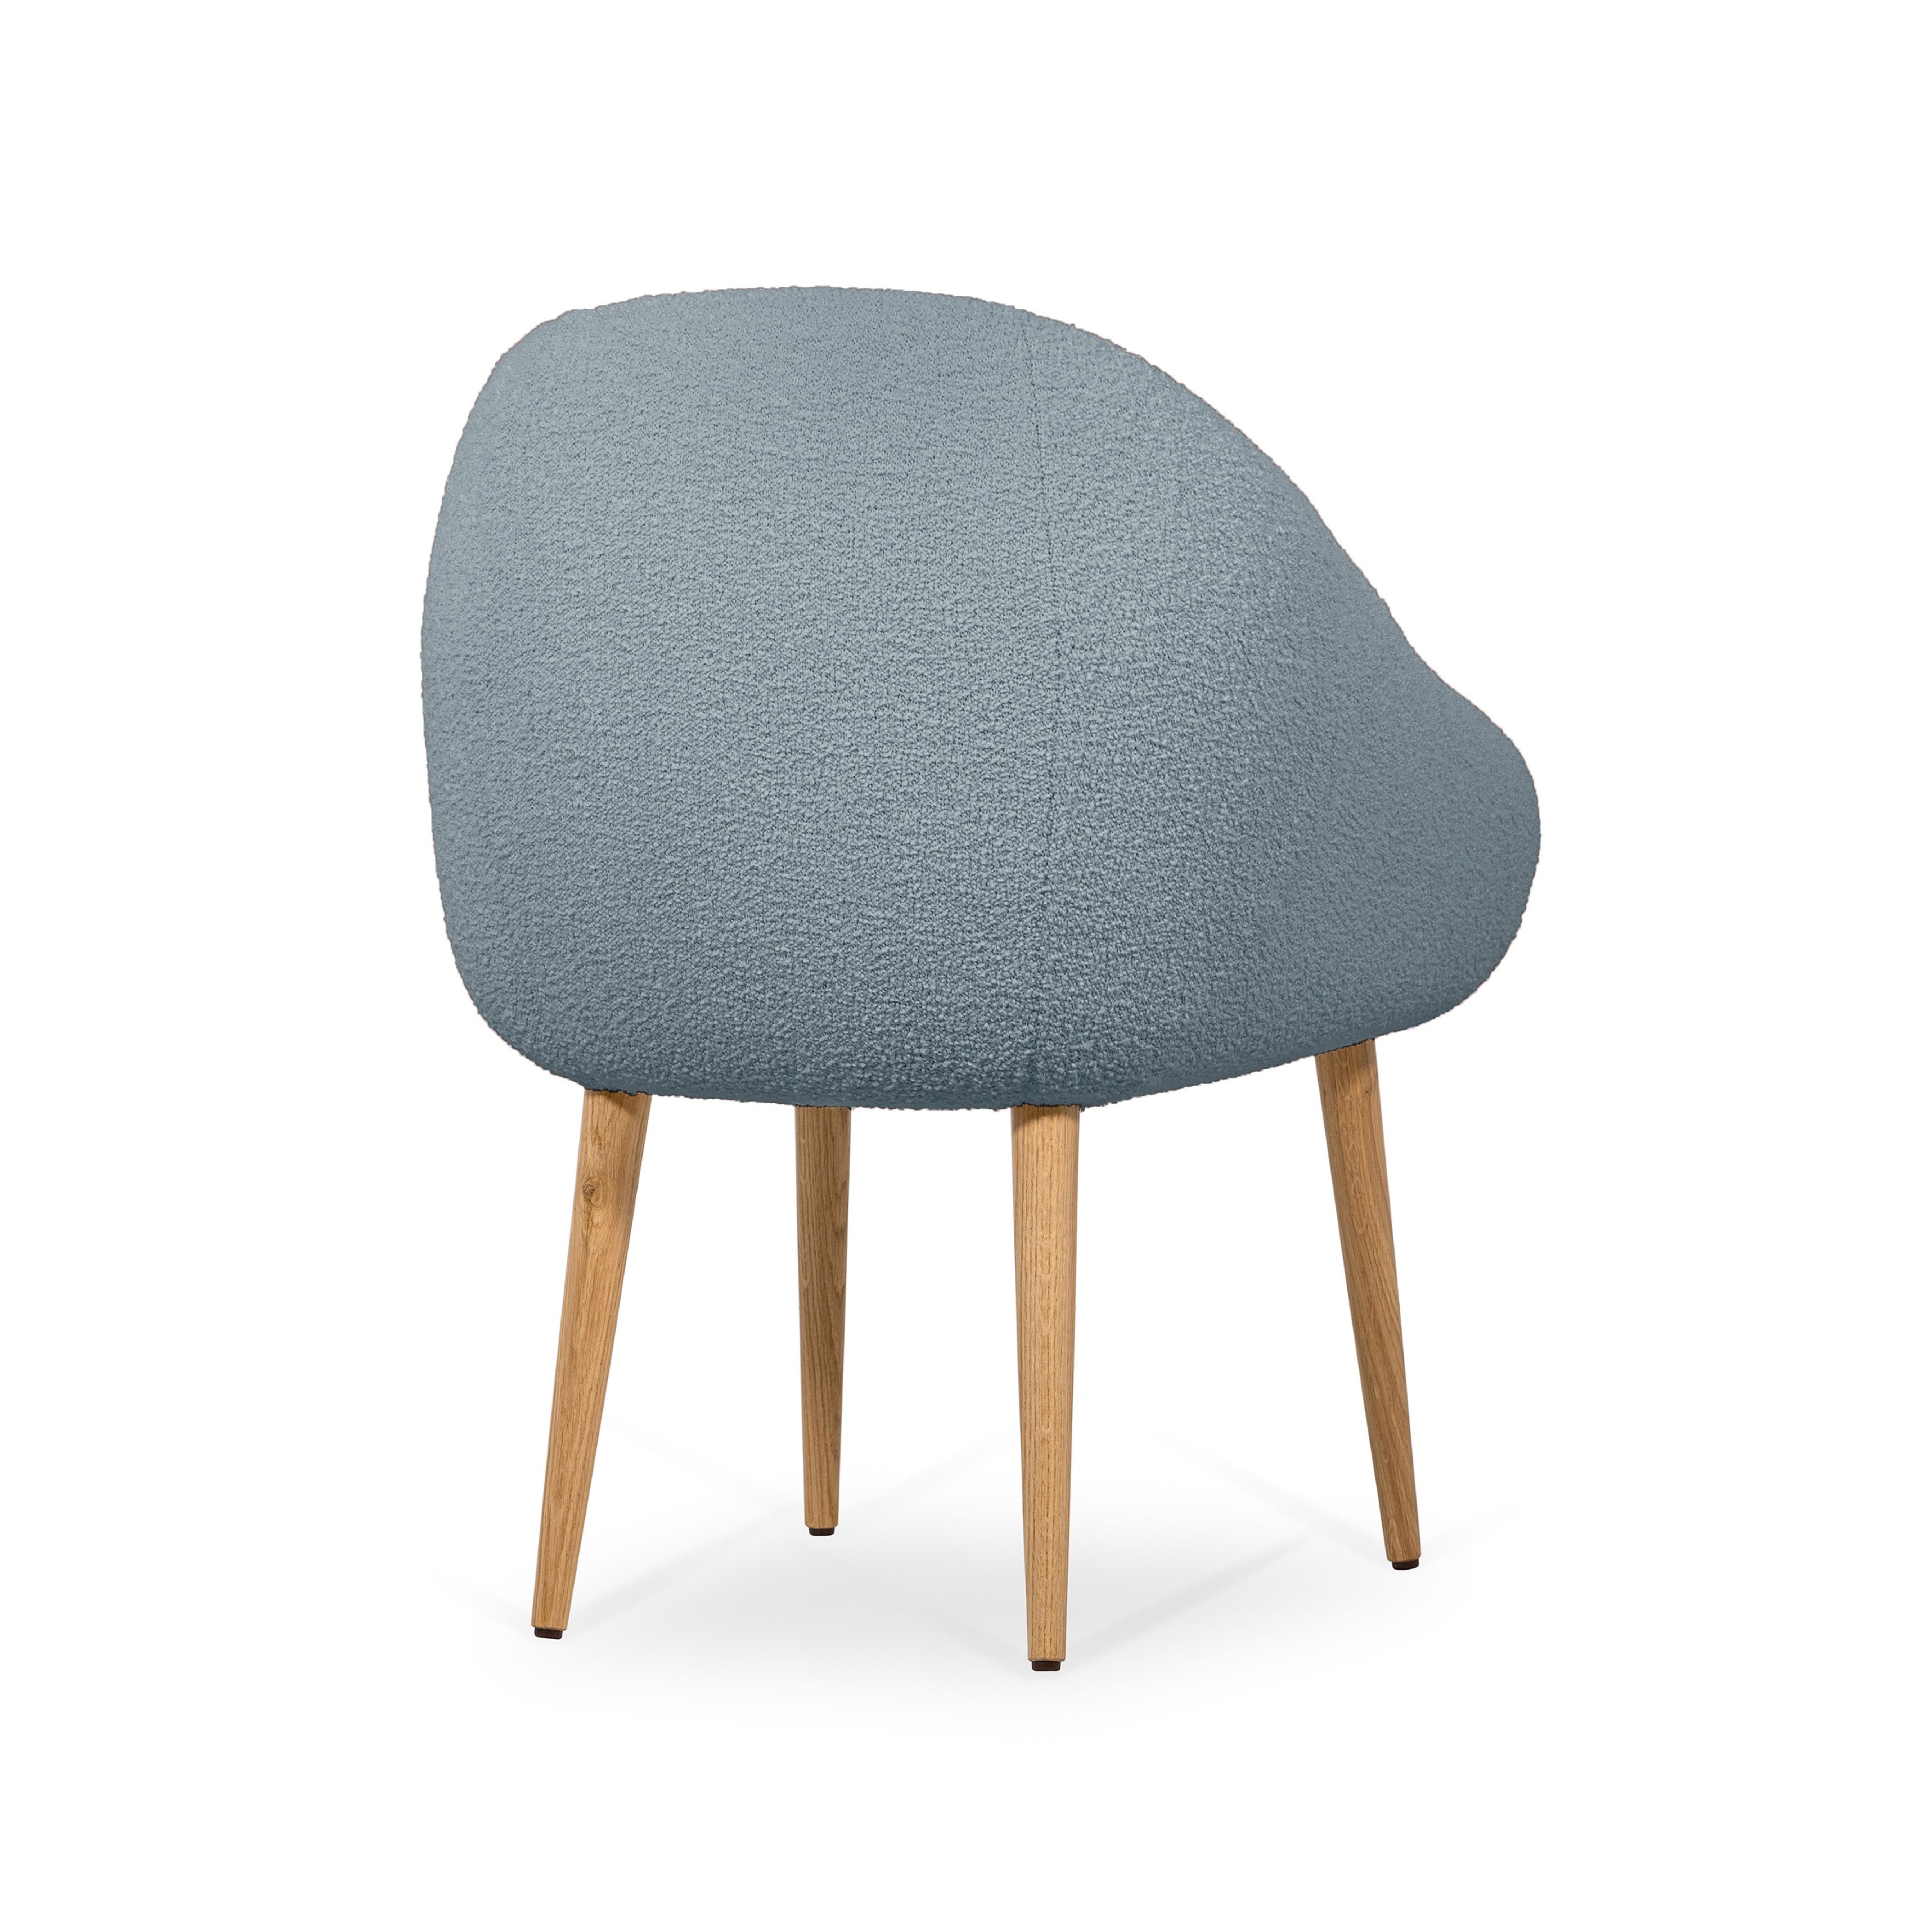 Niemeyer Dining Chair, Bouclé and Oak, Insidherland by Joana Santos Barbosa In New Condition For Sale In Maia, Porto